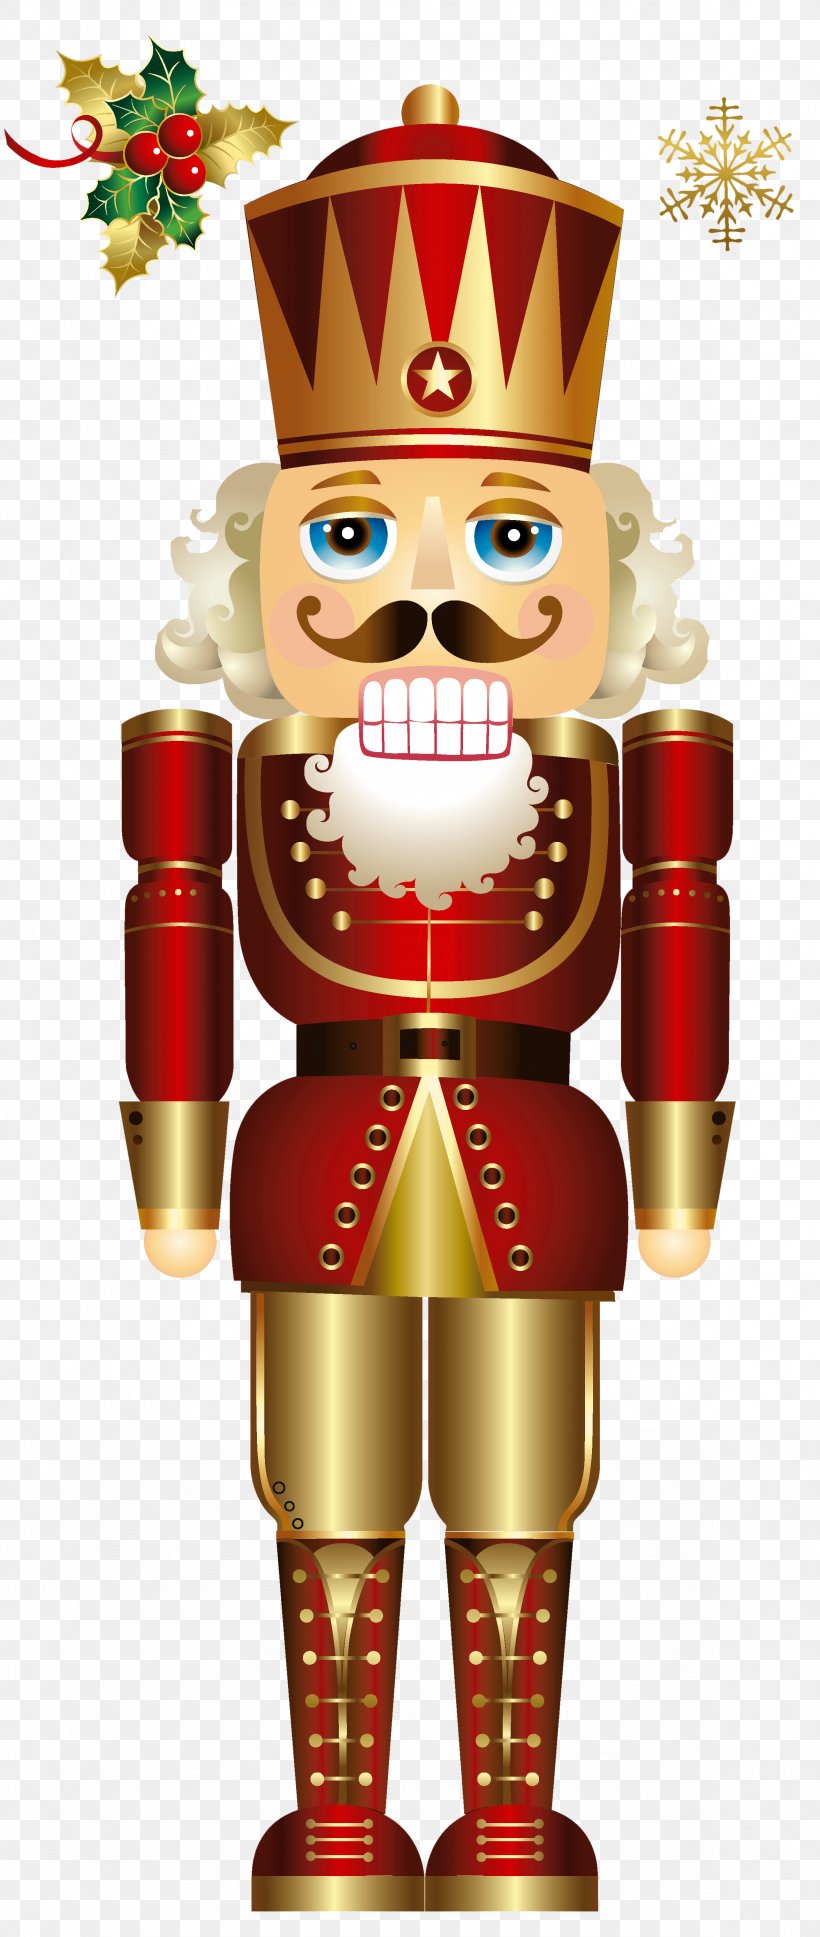 The Nutcracker And The Mouse King Clip Art, PNG, 2352x5558px, Nutcracker Doll, Christmas, Christmas Decoration, Christmas Ornament, Decorative Nutcracker Download Free